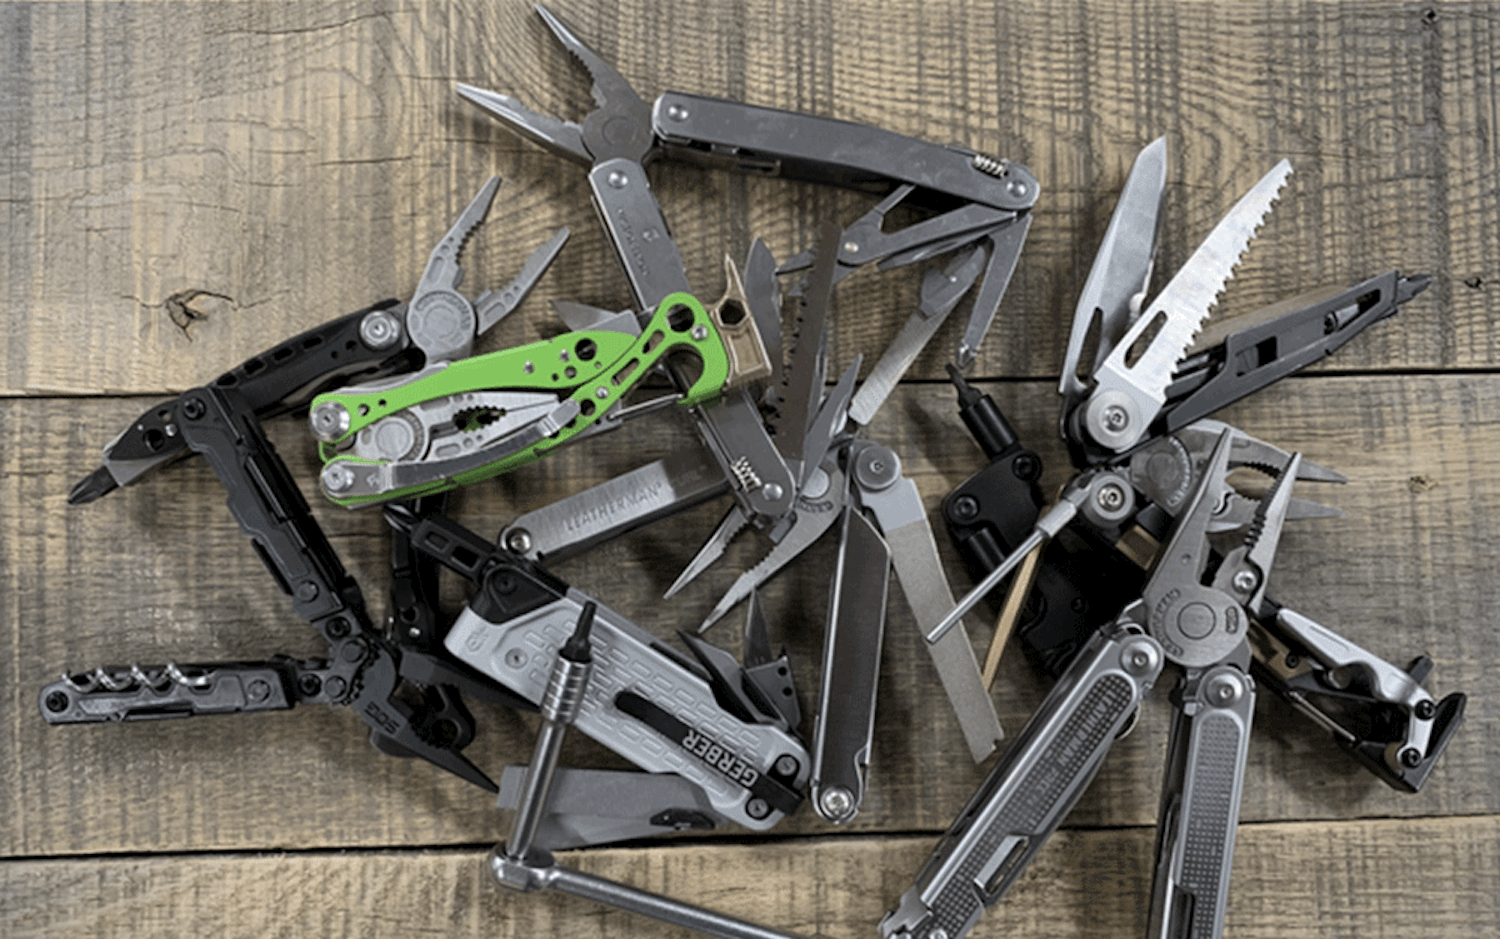 A pile of multi tools on a wooden surface